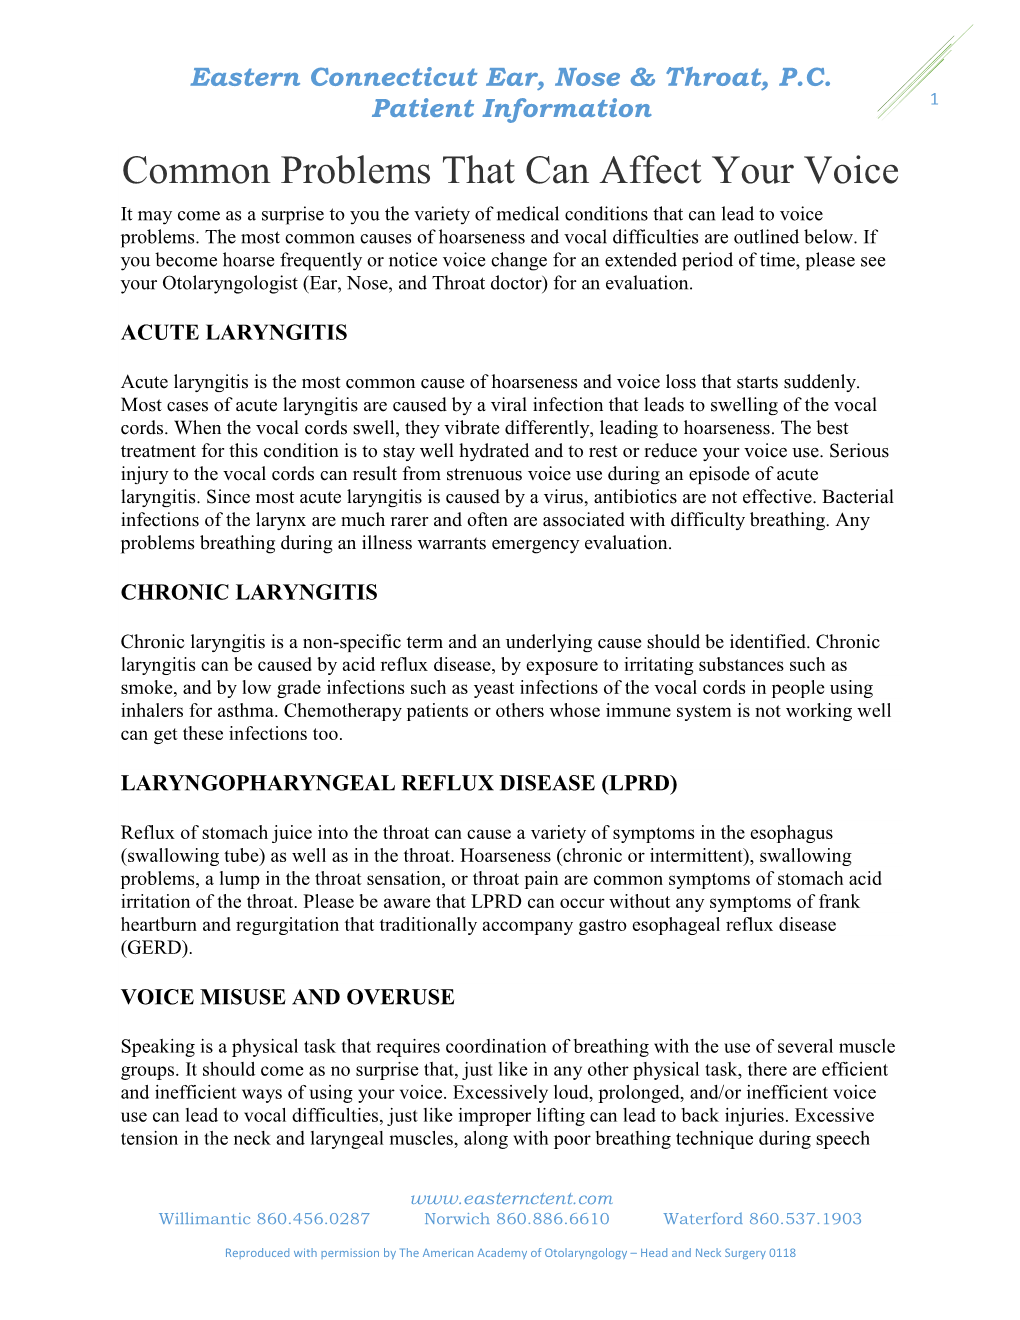 Common Problems That Can Affect Your Voice It May Come As a Surprise to You the Variety of Medical Conditions That Can Lead to Voice Problems